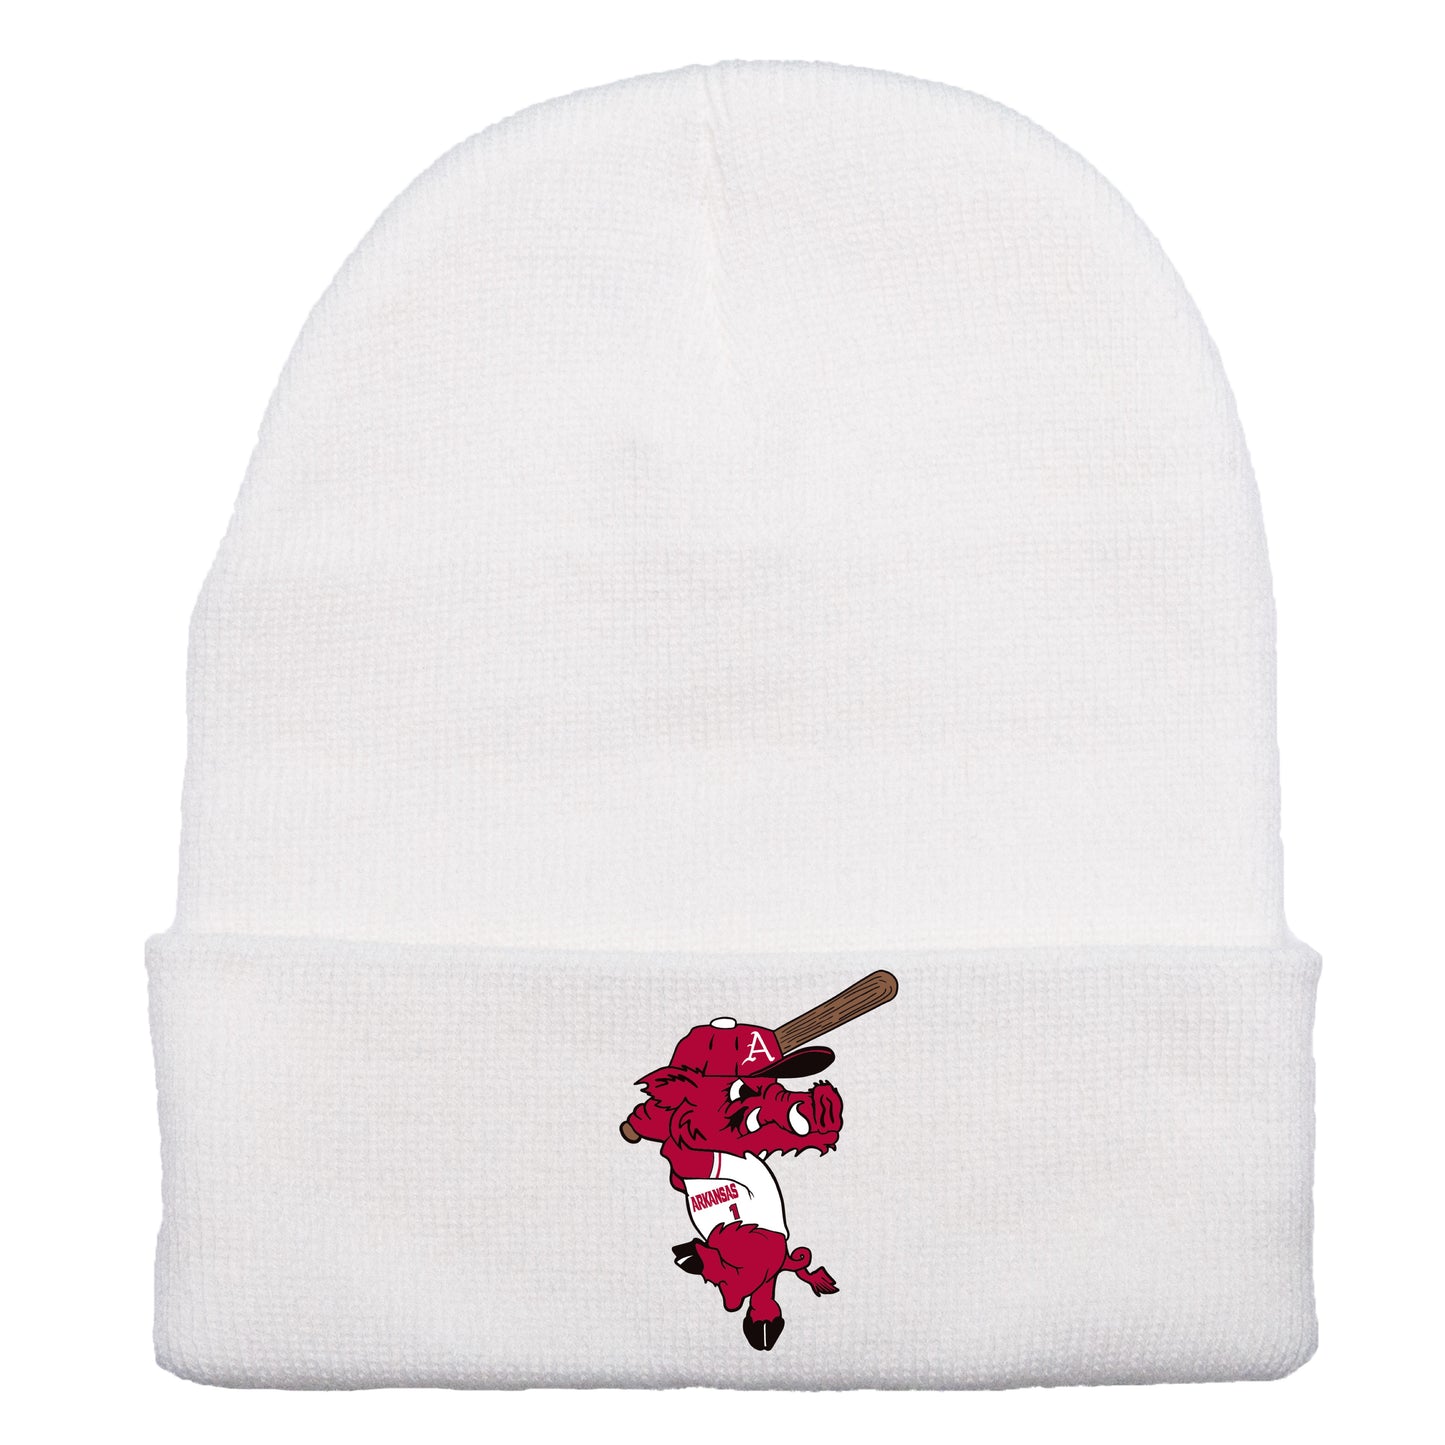 Ribby at Bat 12 in Knit Beanie- White - Ten Gallon Hat Co.